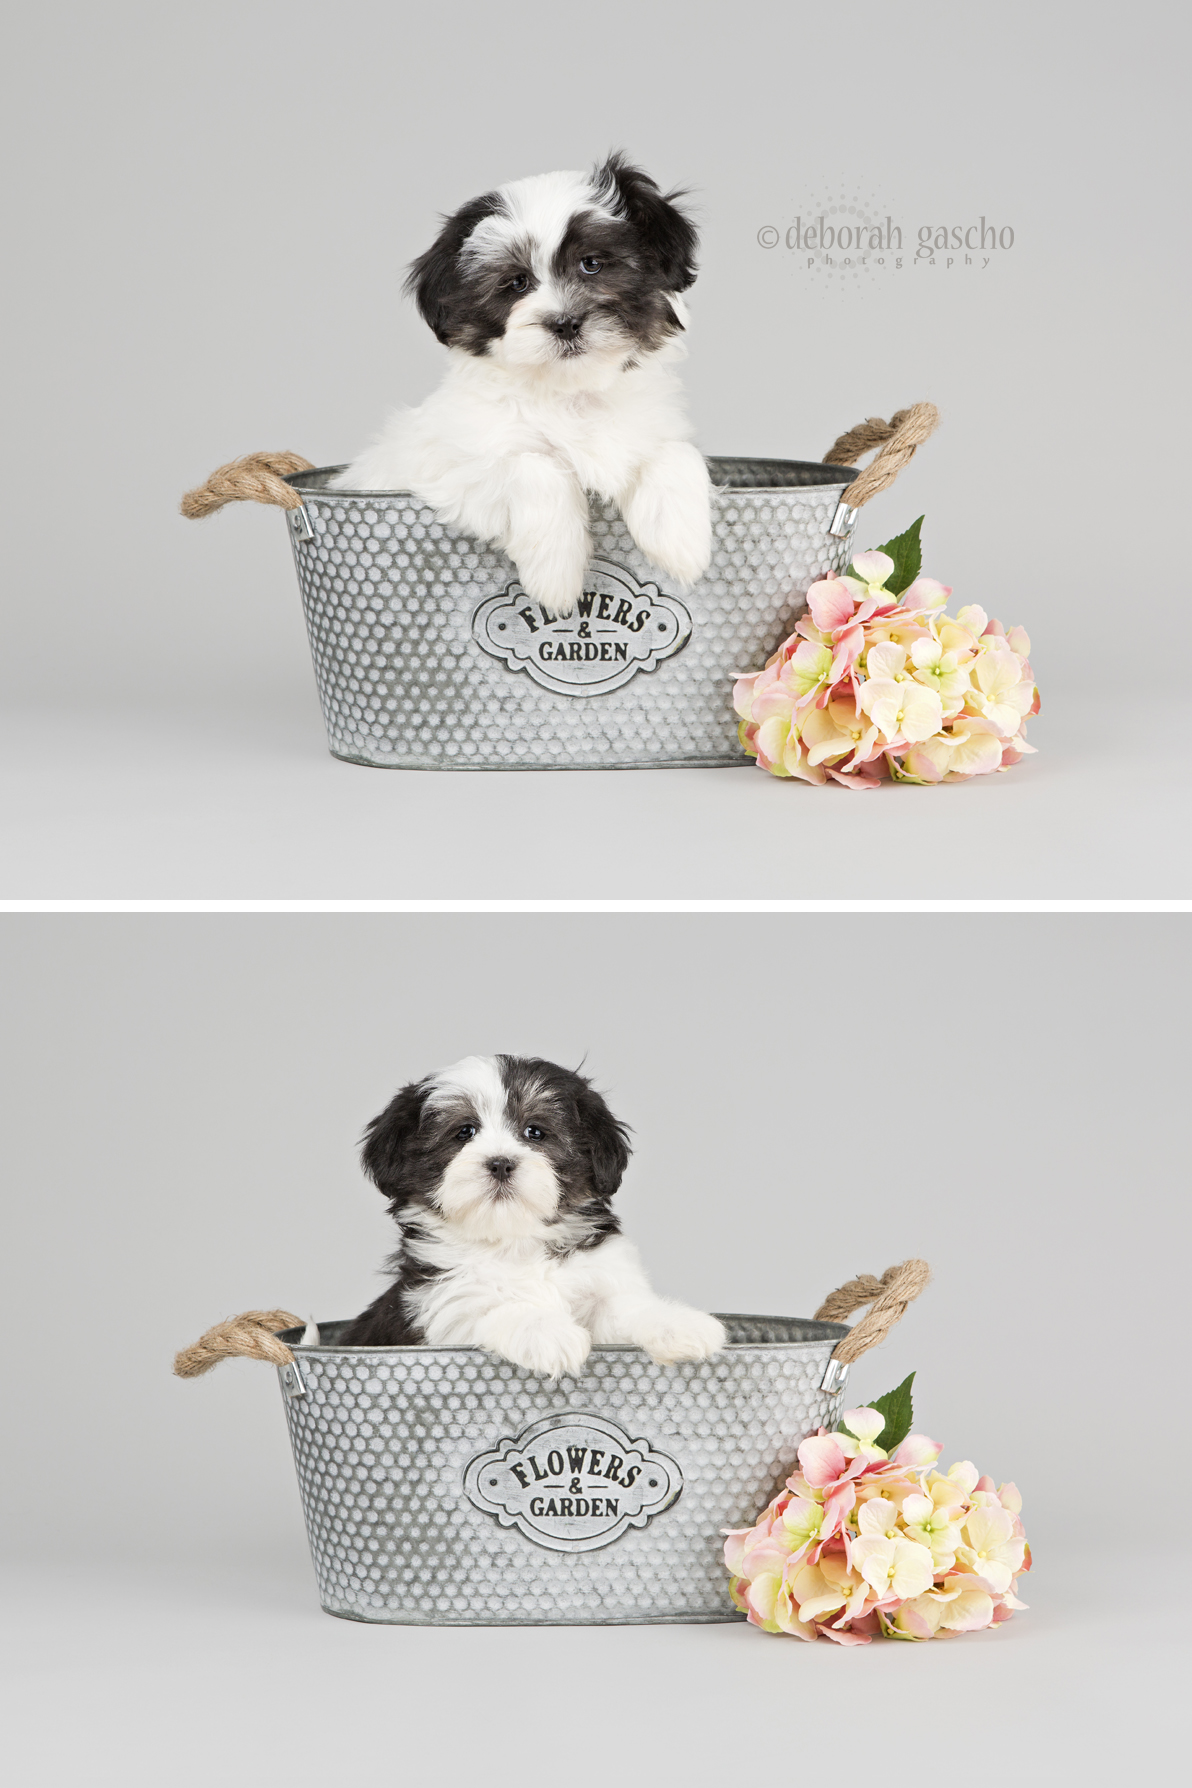 alt="shih tzu x toy poodle puppies for sale in ontario"